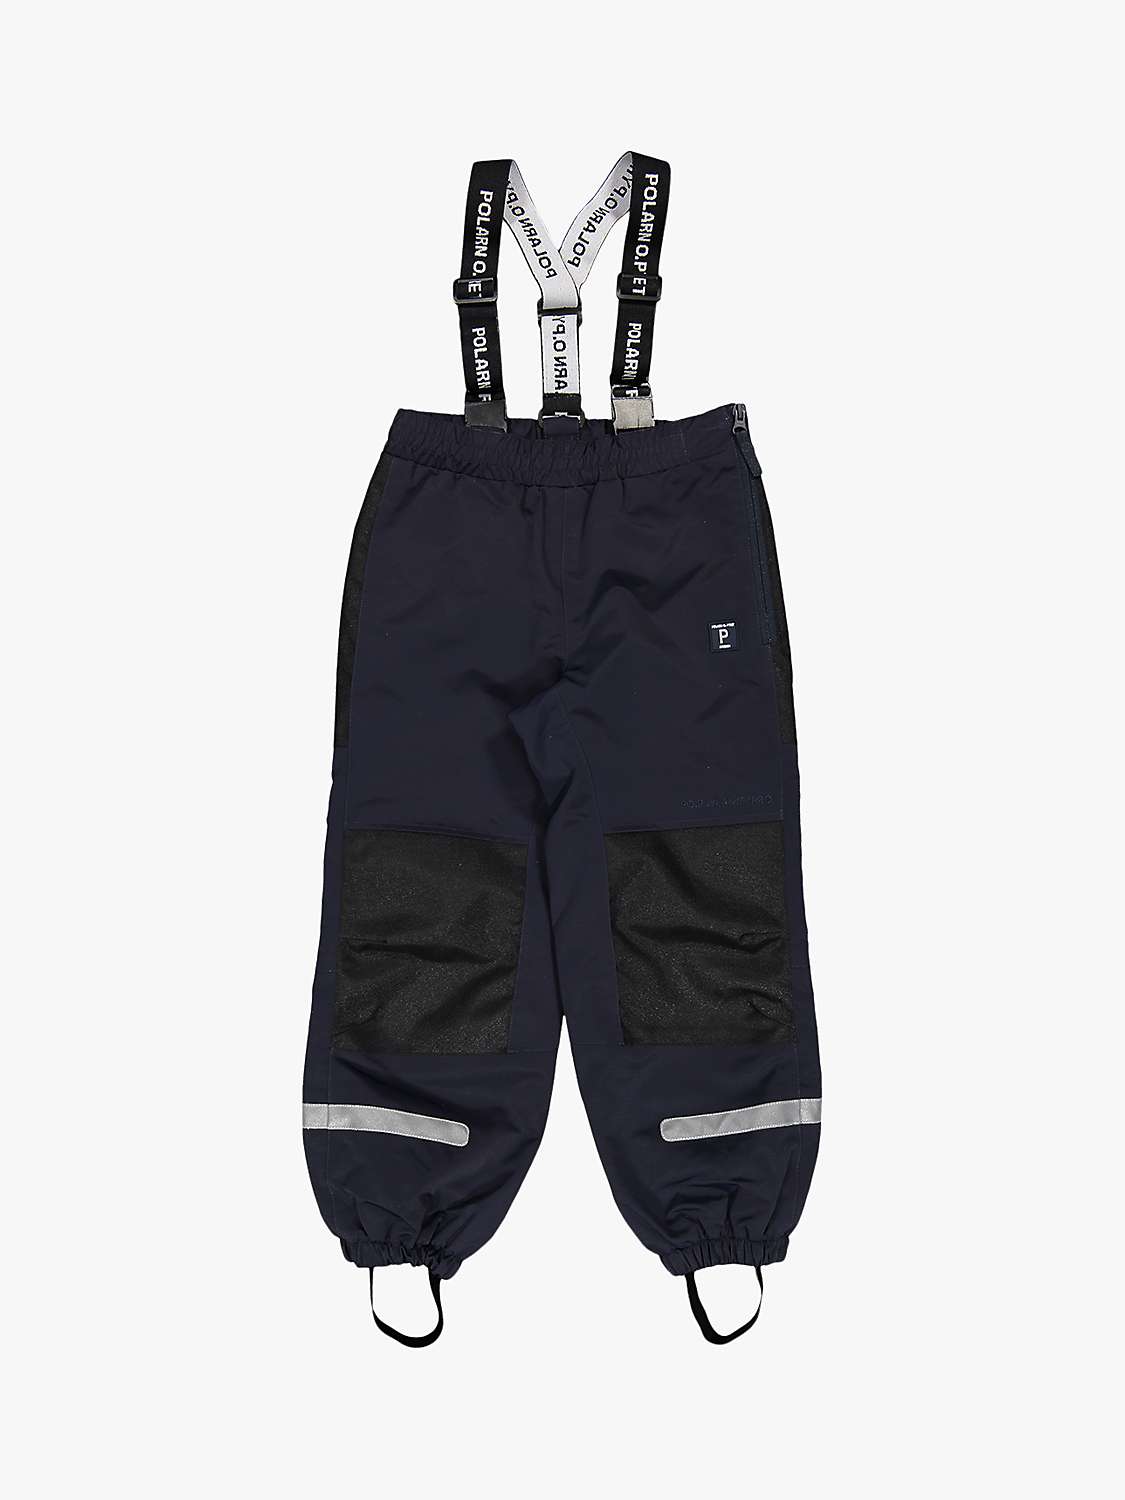 Buy Polarn O. Pyret Kids' Waterproof Trousers Online at johnlewis.com